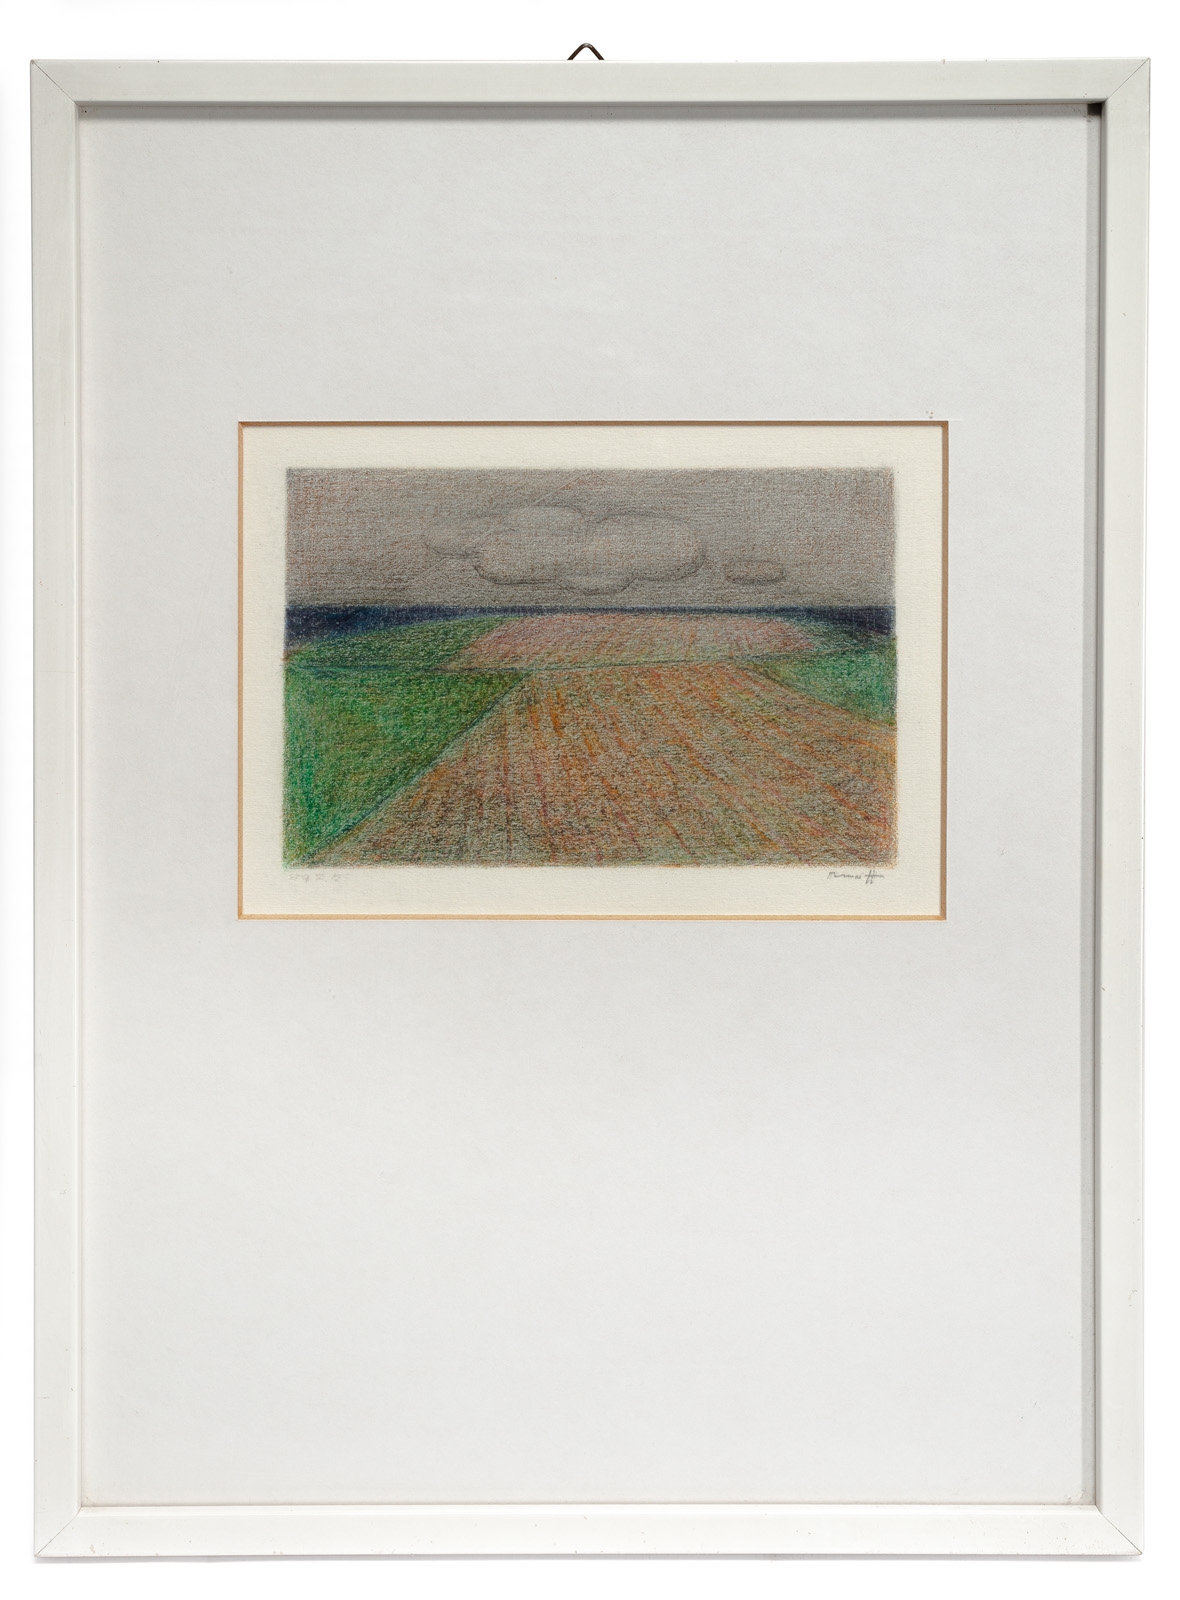 Artwork by Fritz Ruoff, Landscape, Made of Coloured pencil on paper